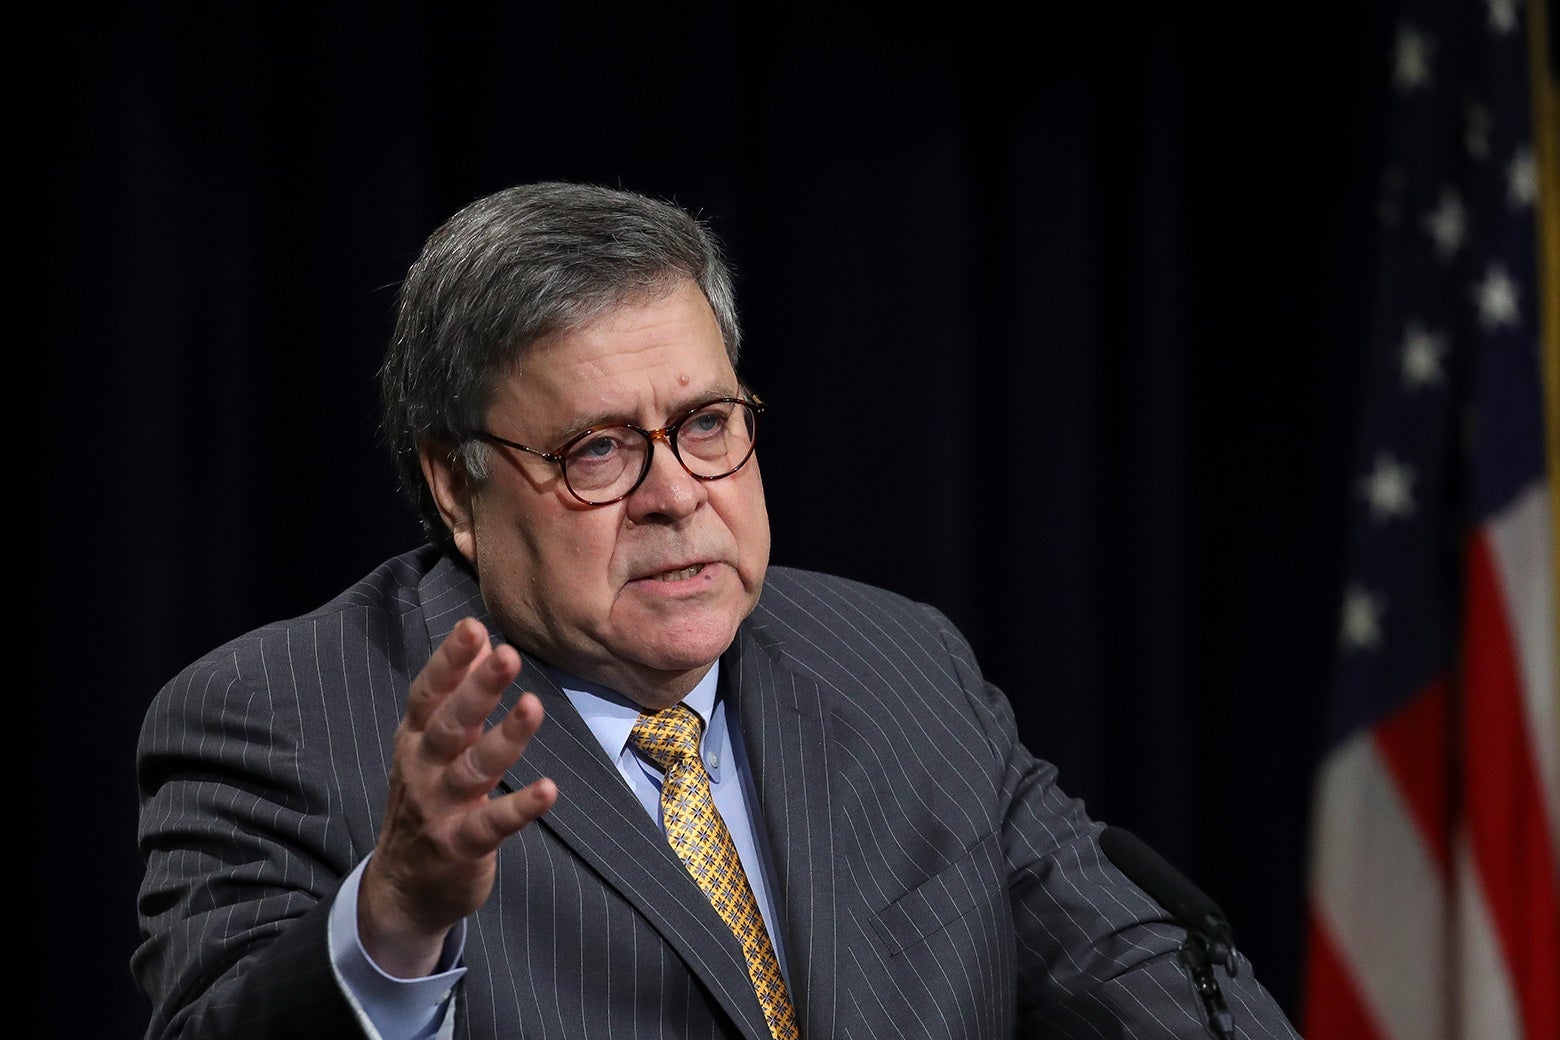 William Barr holds his hand up while standing behind a podium.